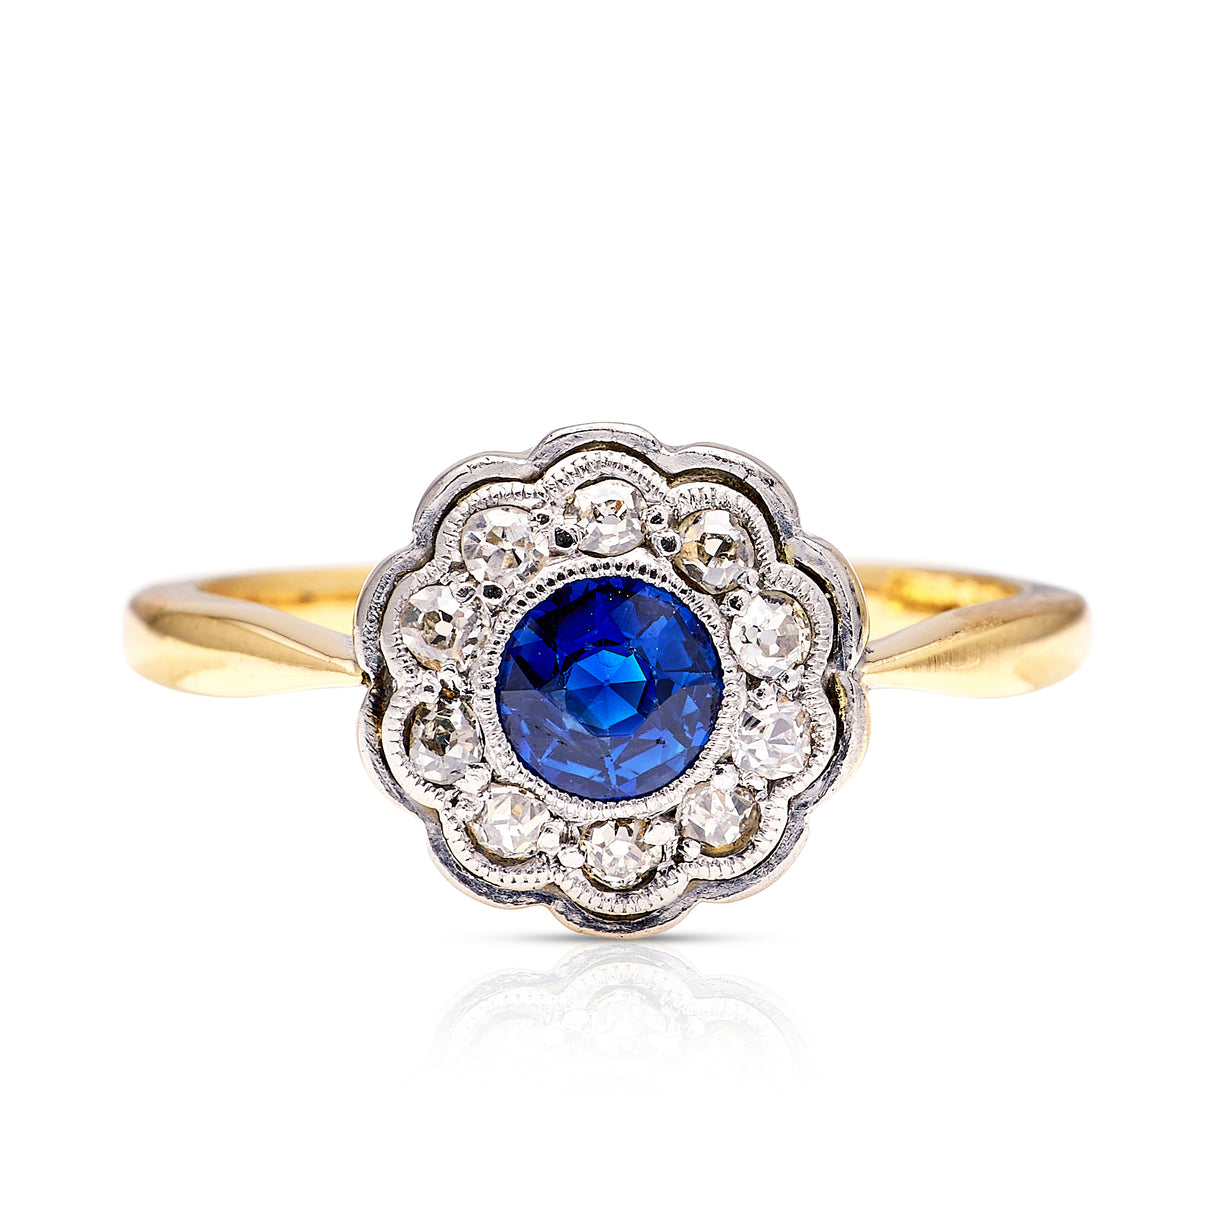 Antique, Edwardian Sapphire and Diamond Cluster Ring, 18ct Yellow Gold and Platinum